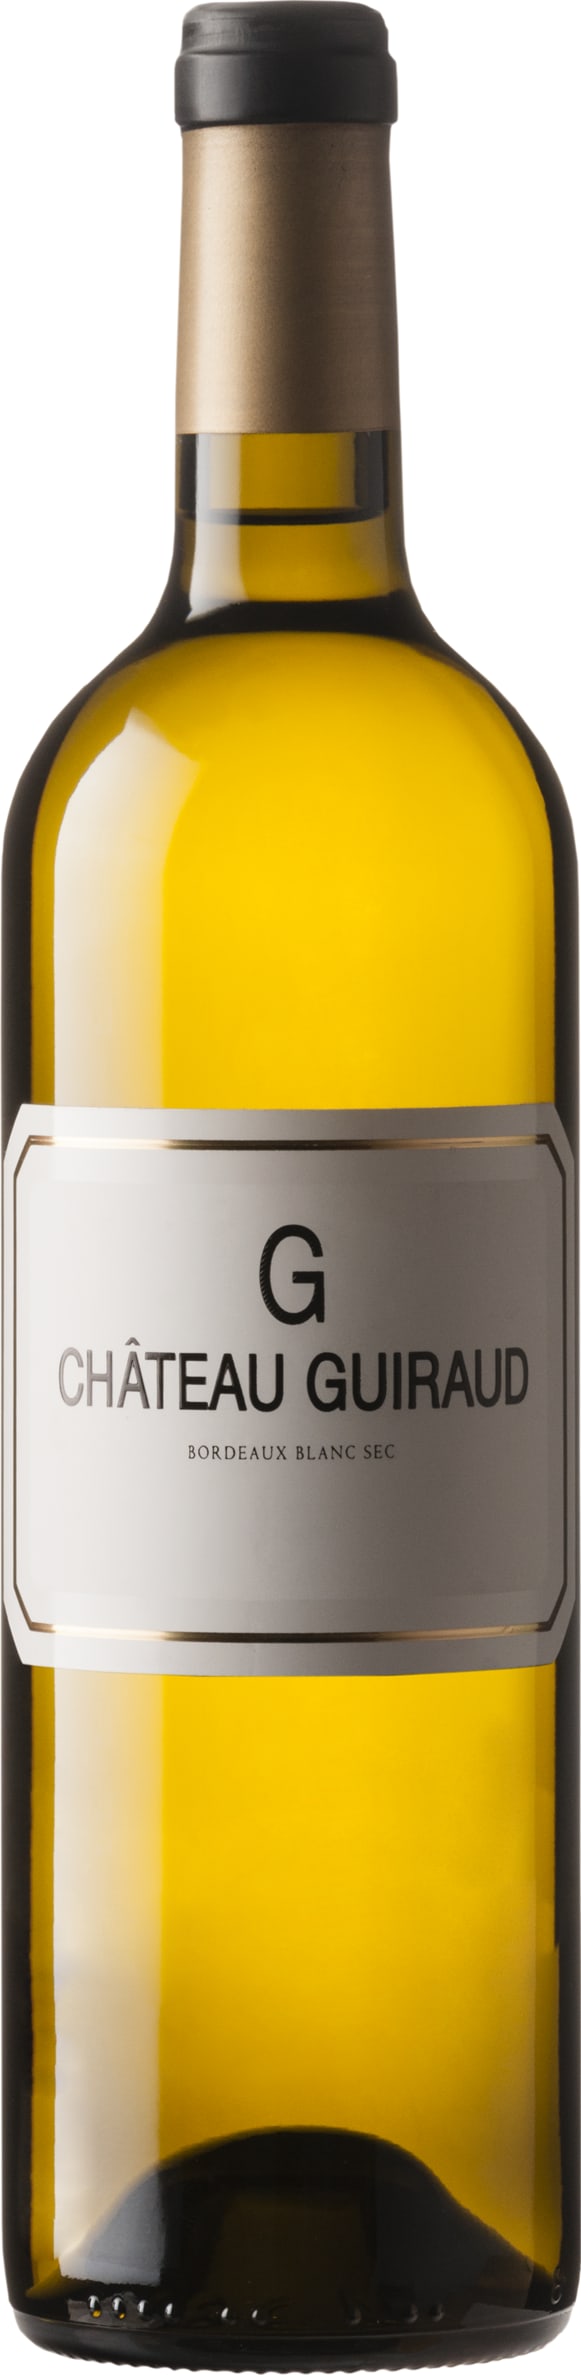 Chateau Guiraud Bordeaux Blanc Sec 2019 75cl - Buy Chateau Guiraud Wines from GREAT WINES DIRECT wine shop